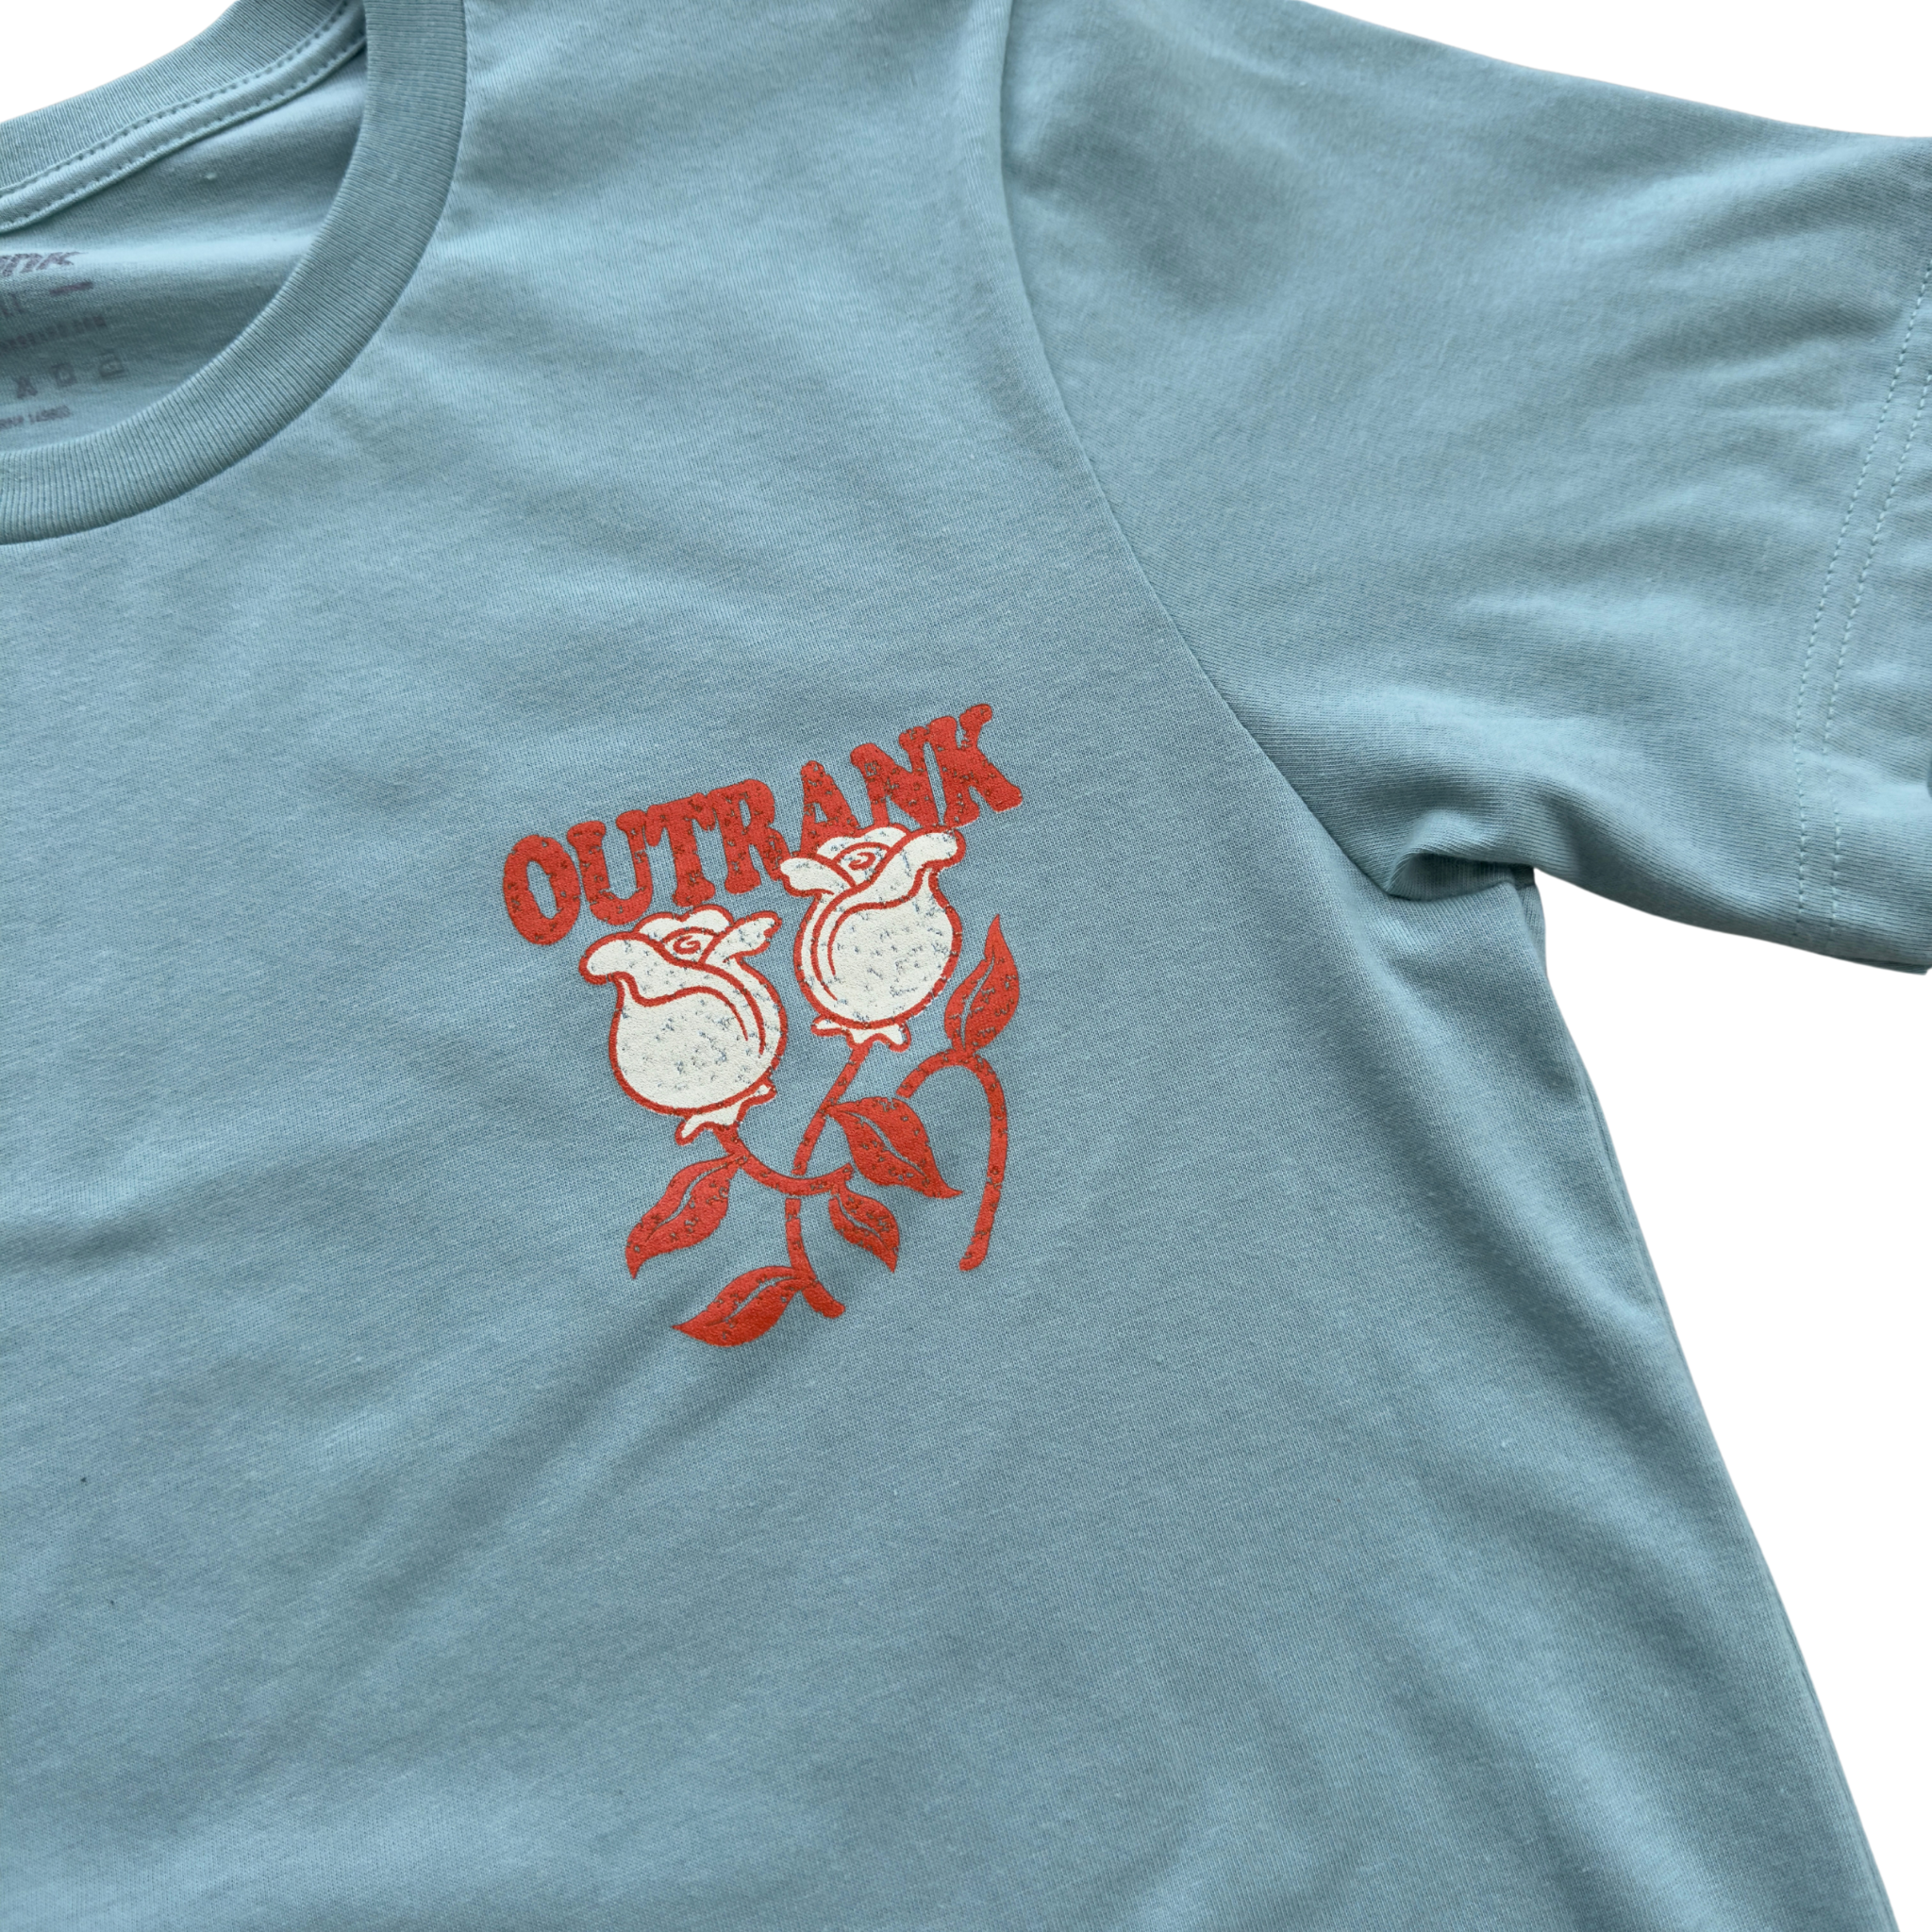 Outrank Flowers T-shirt (Mint) - Outrank